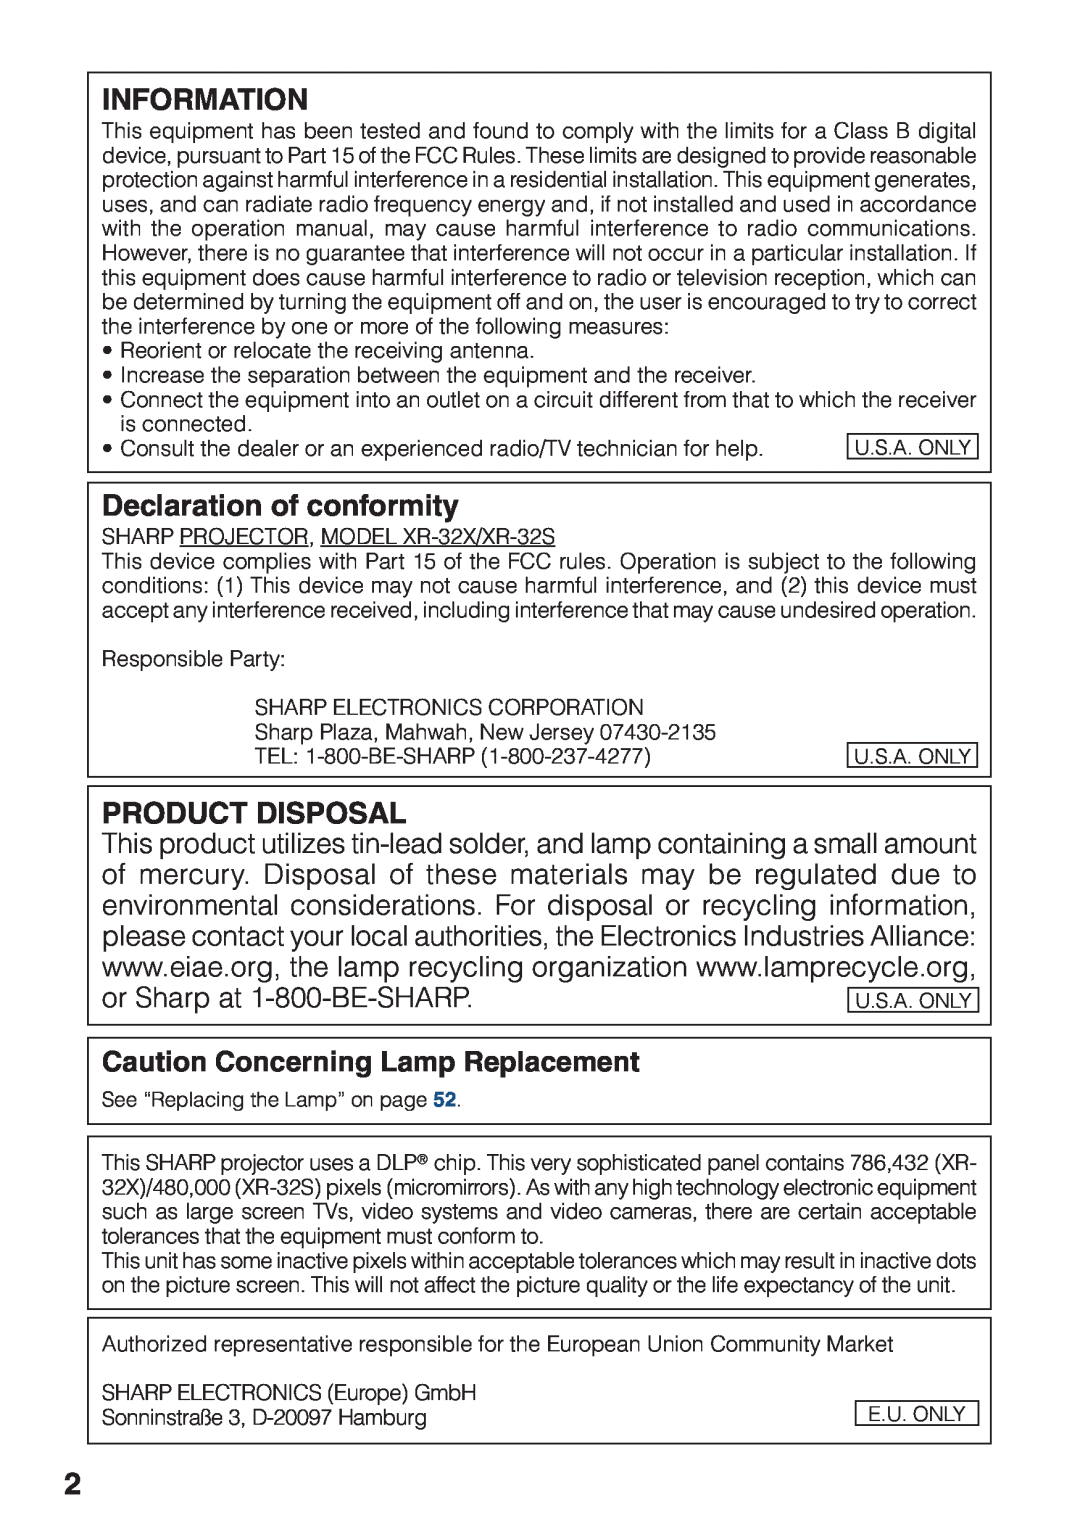 Sharp XR-32X quick start Information, Declaration of conformity, Product Disposal, Caution Concerning Lamp Replacement 